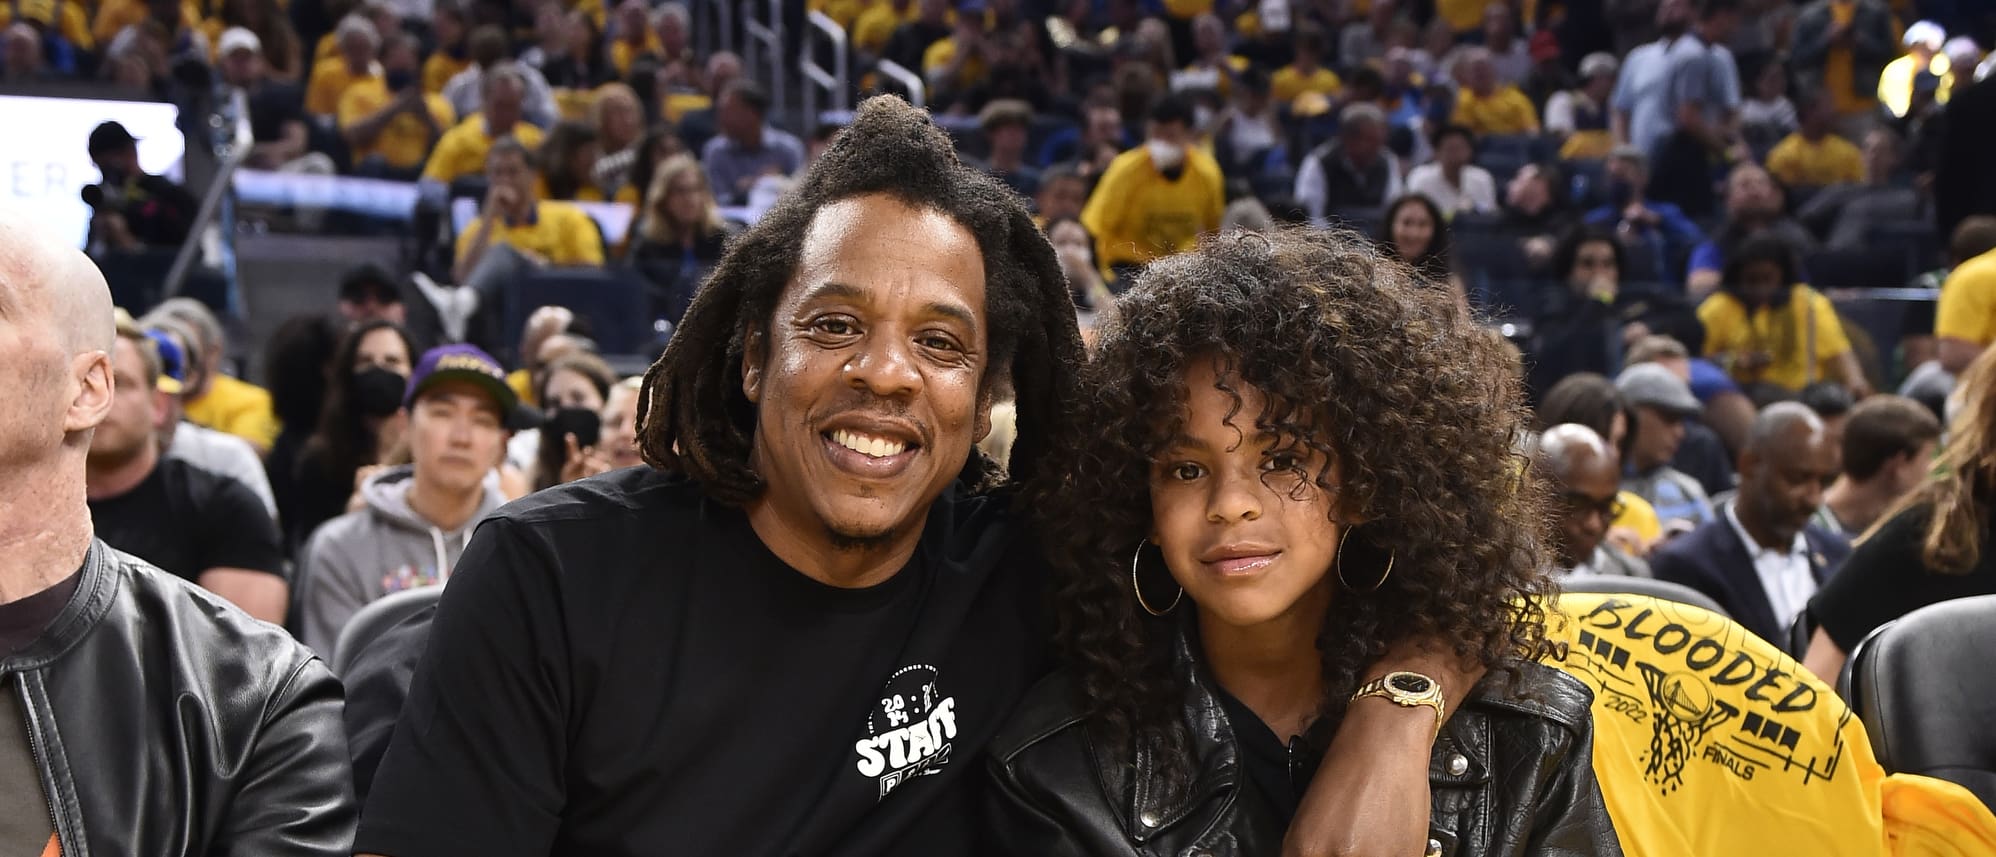 fans-gush-over-blue-ivys-hair-at-nba-game-with-jay-z-call-her-her-mamas-twin